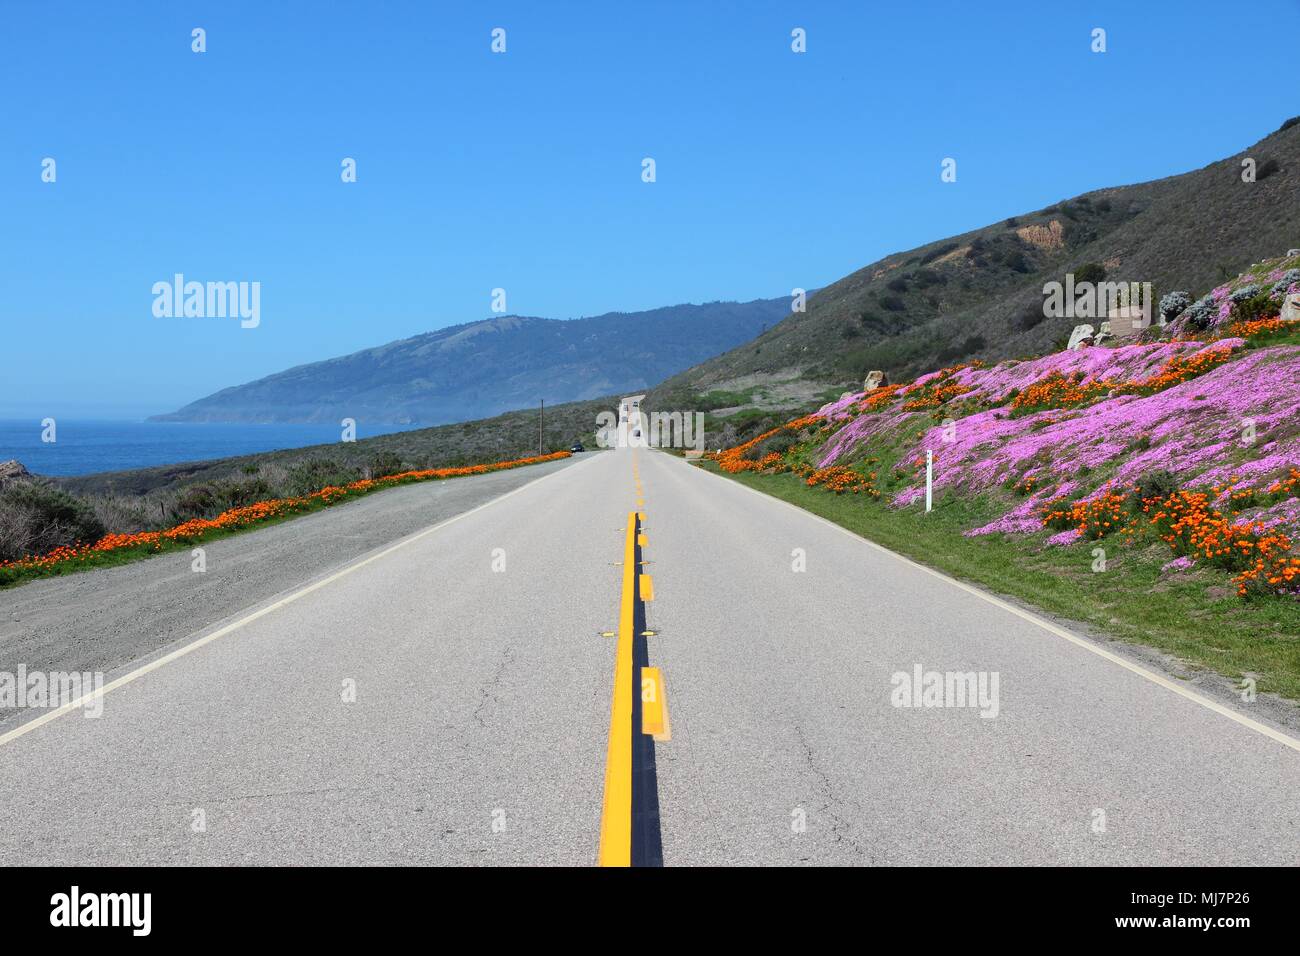 California, United States - Pacific Coast Highway scenic drive. Cabrillo Highway with flowers (orange ones are California poppy). Stock Photo